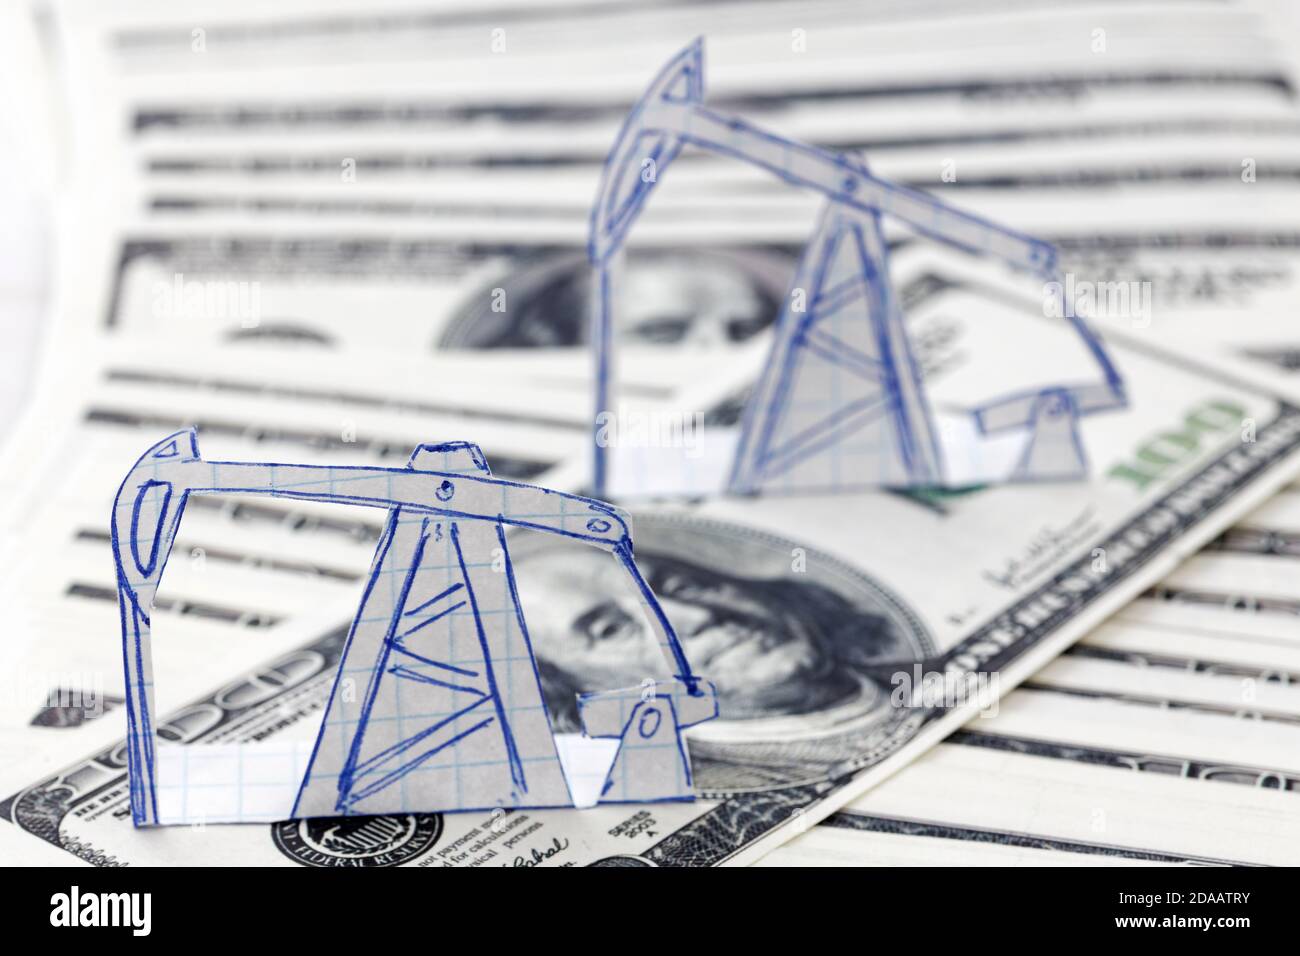 Petroleum pumpjack and oil rigs from paper on a heap of 100 dollar bills. Shallow focus. Concept image. Stock Photo